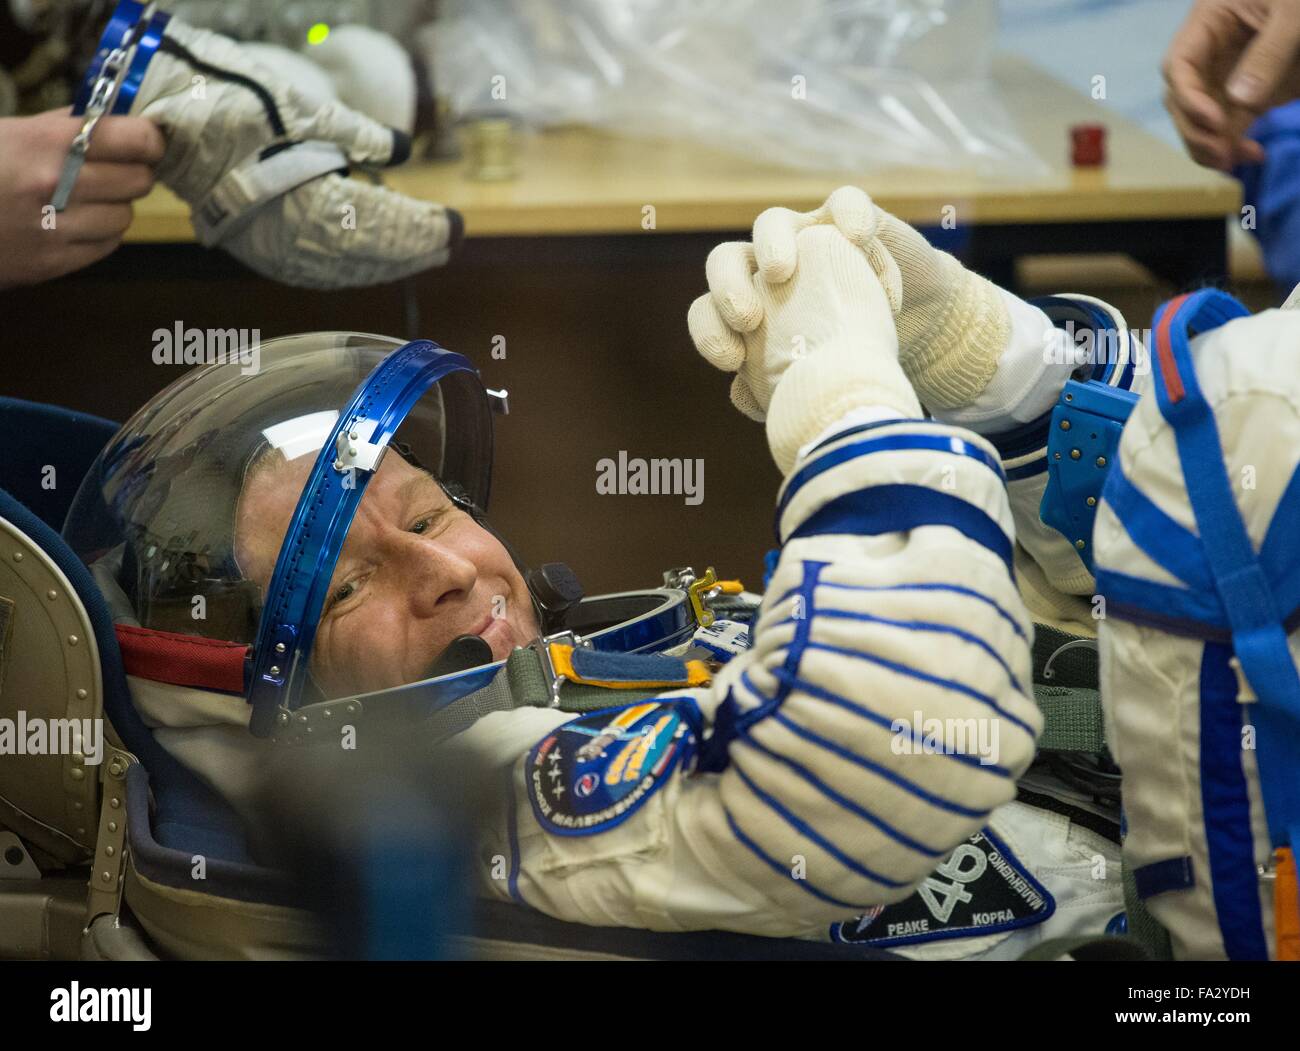 International Space Station Expedition 46 crew member British astronaut Tim Peake has his Sokol space suits adjusted in Building 254 before launch onboard the Soyuz TMA-19M spacecraft December 15, 2015 in Baikonur, Kazakhstan. Stock Photo